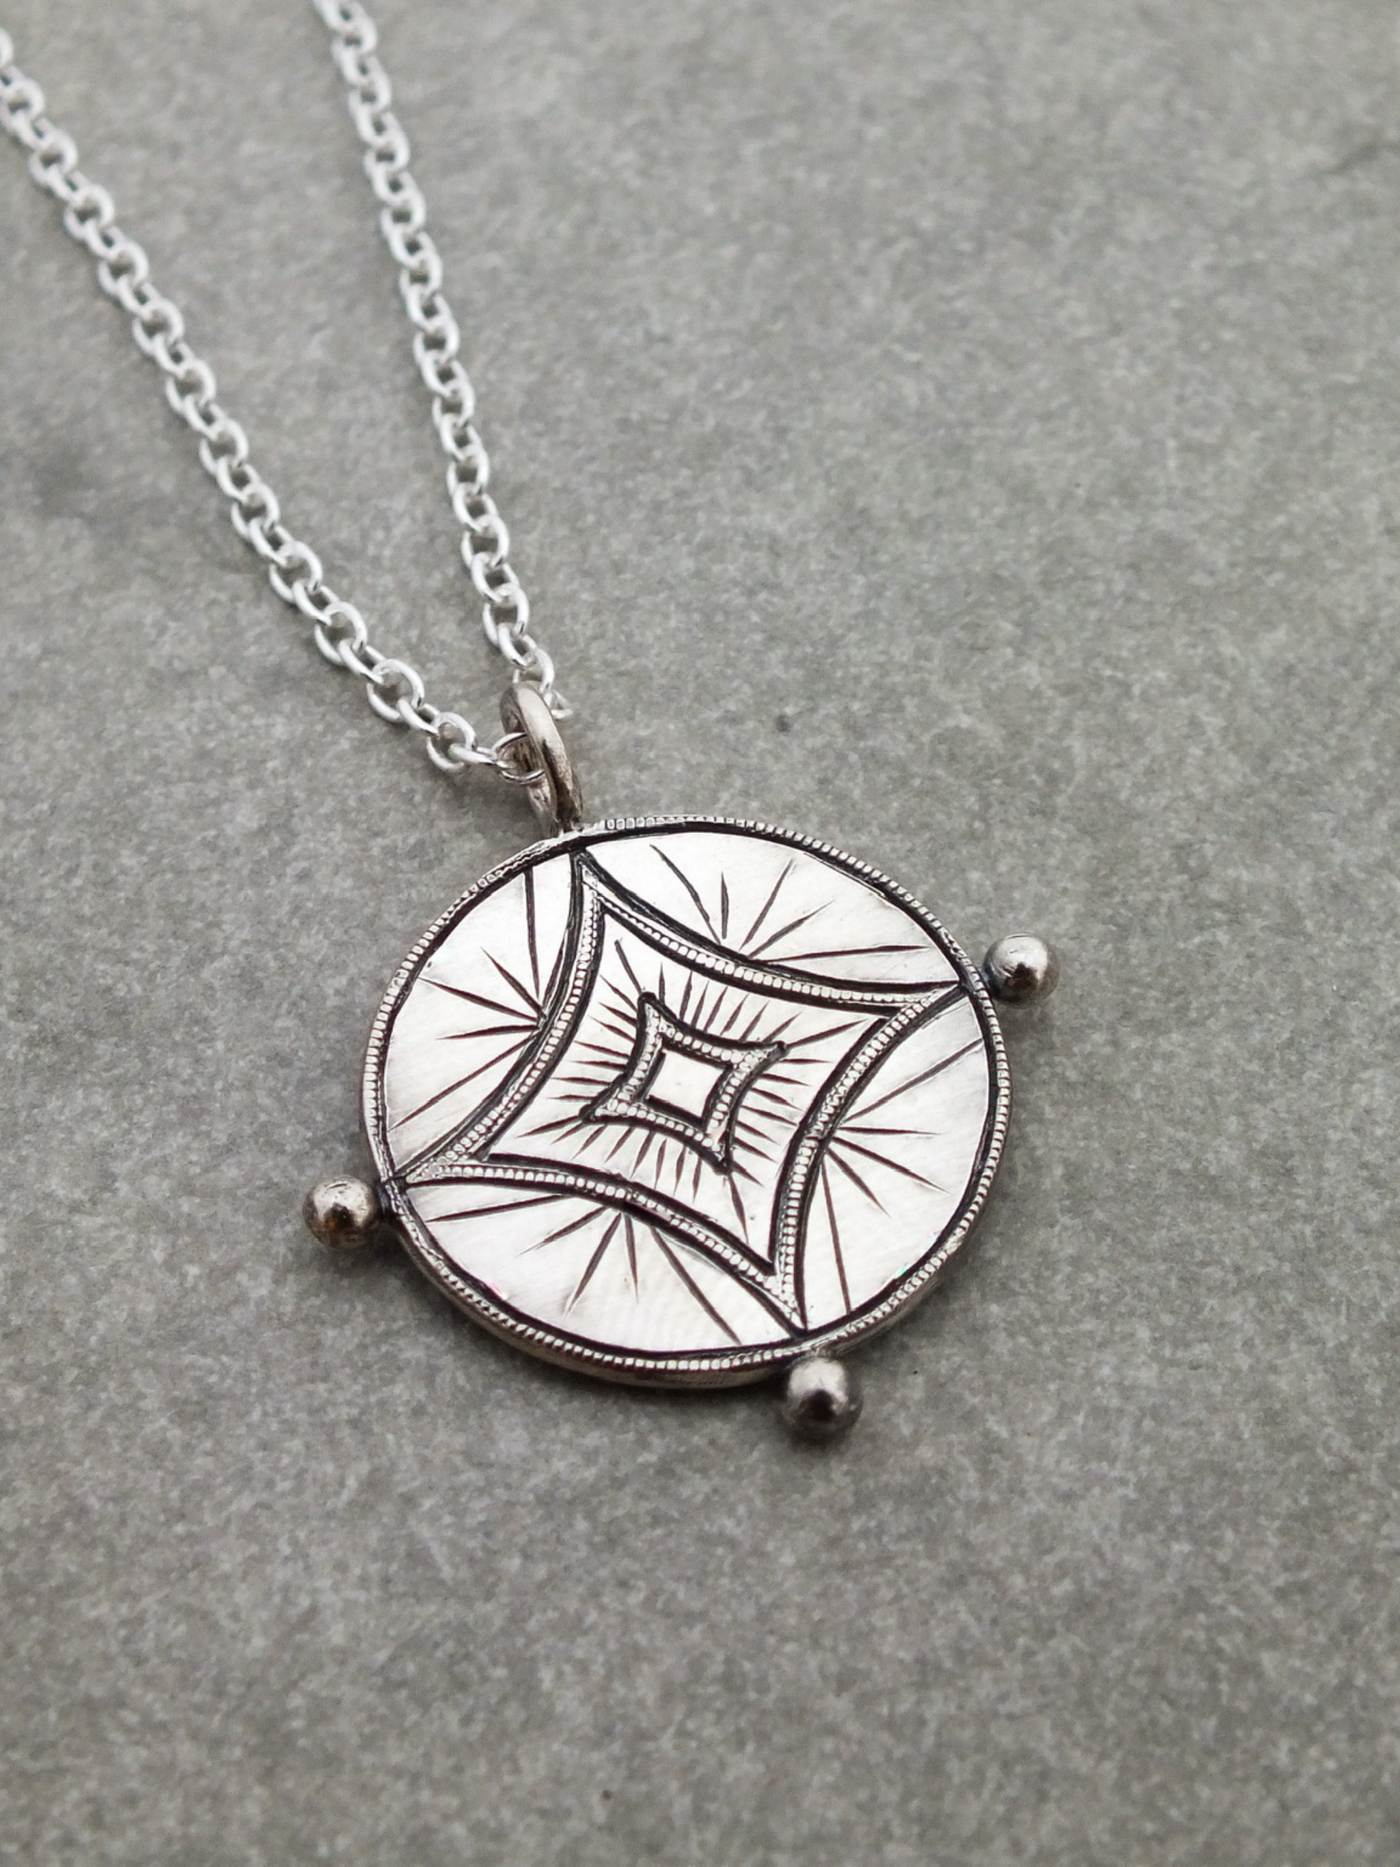 Astraeus Necklace in Sterling Silver